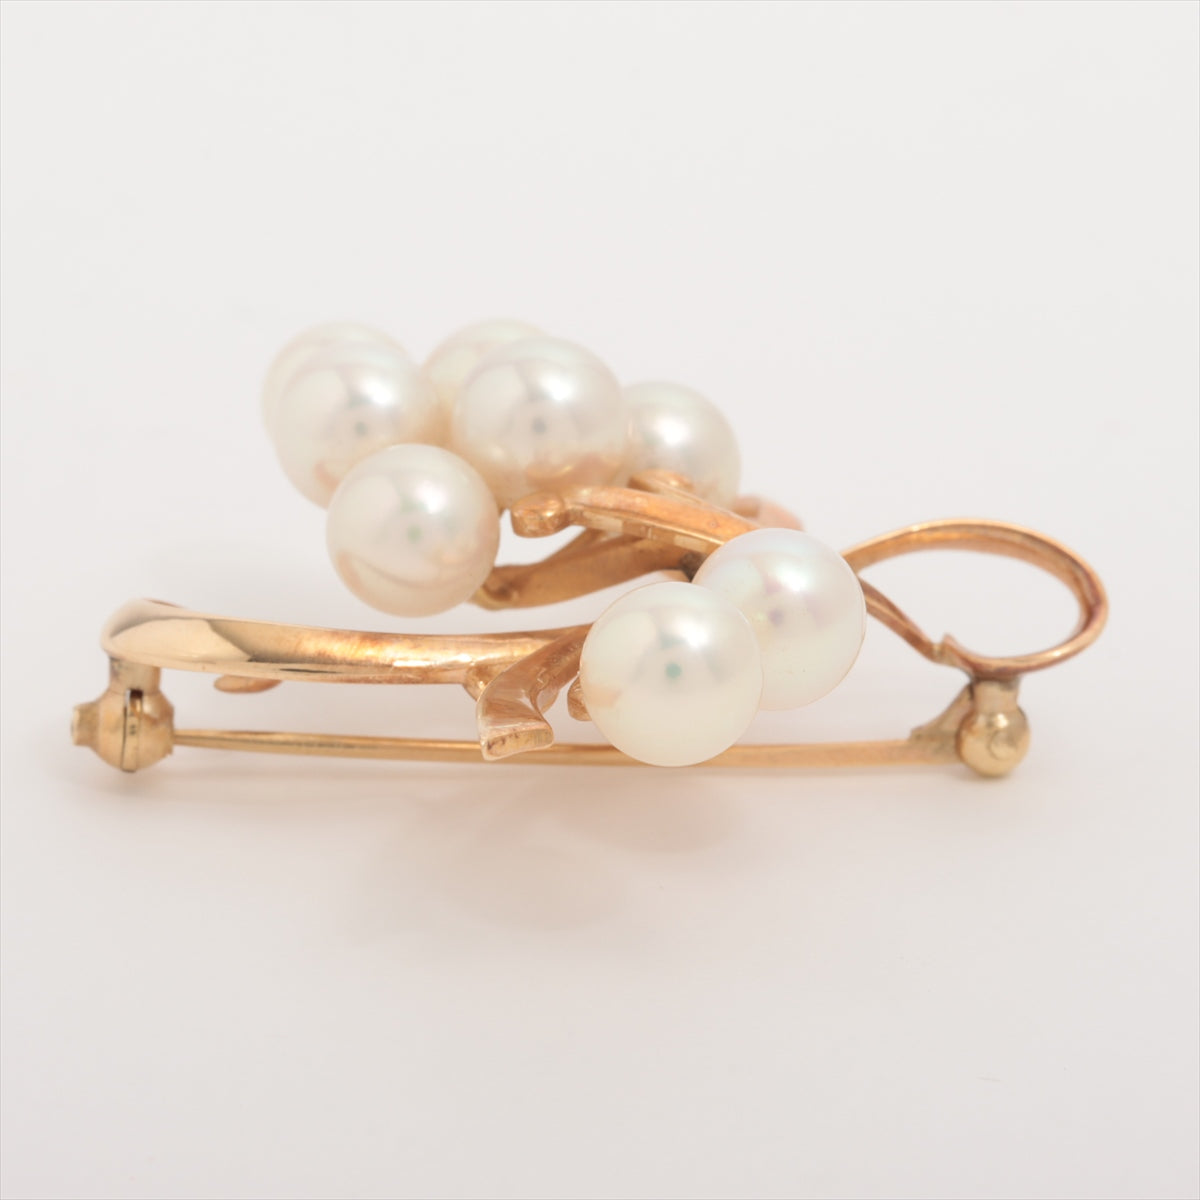 Mikimoto Pearl Brooch K14(YG) 8.8g Approx. 6.5 to 7.0 mm Bullion discoloration Su hole